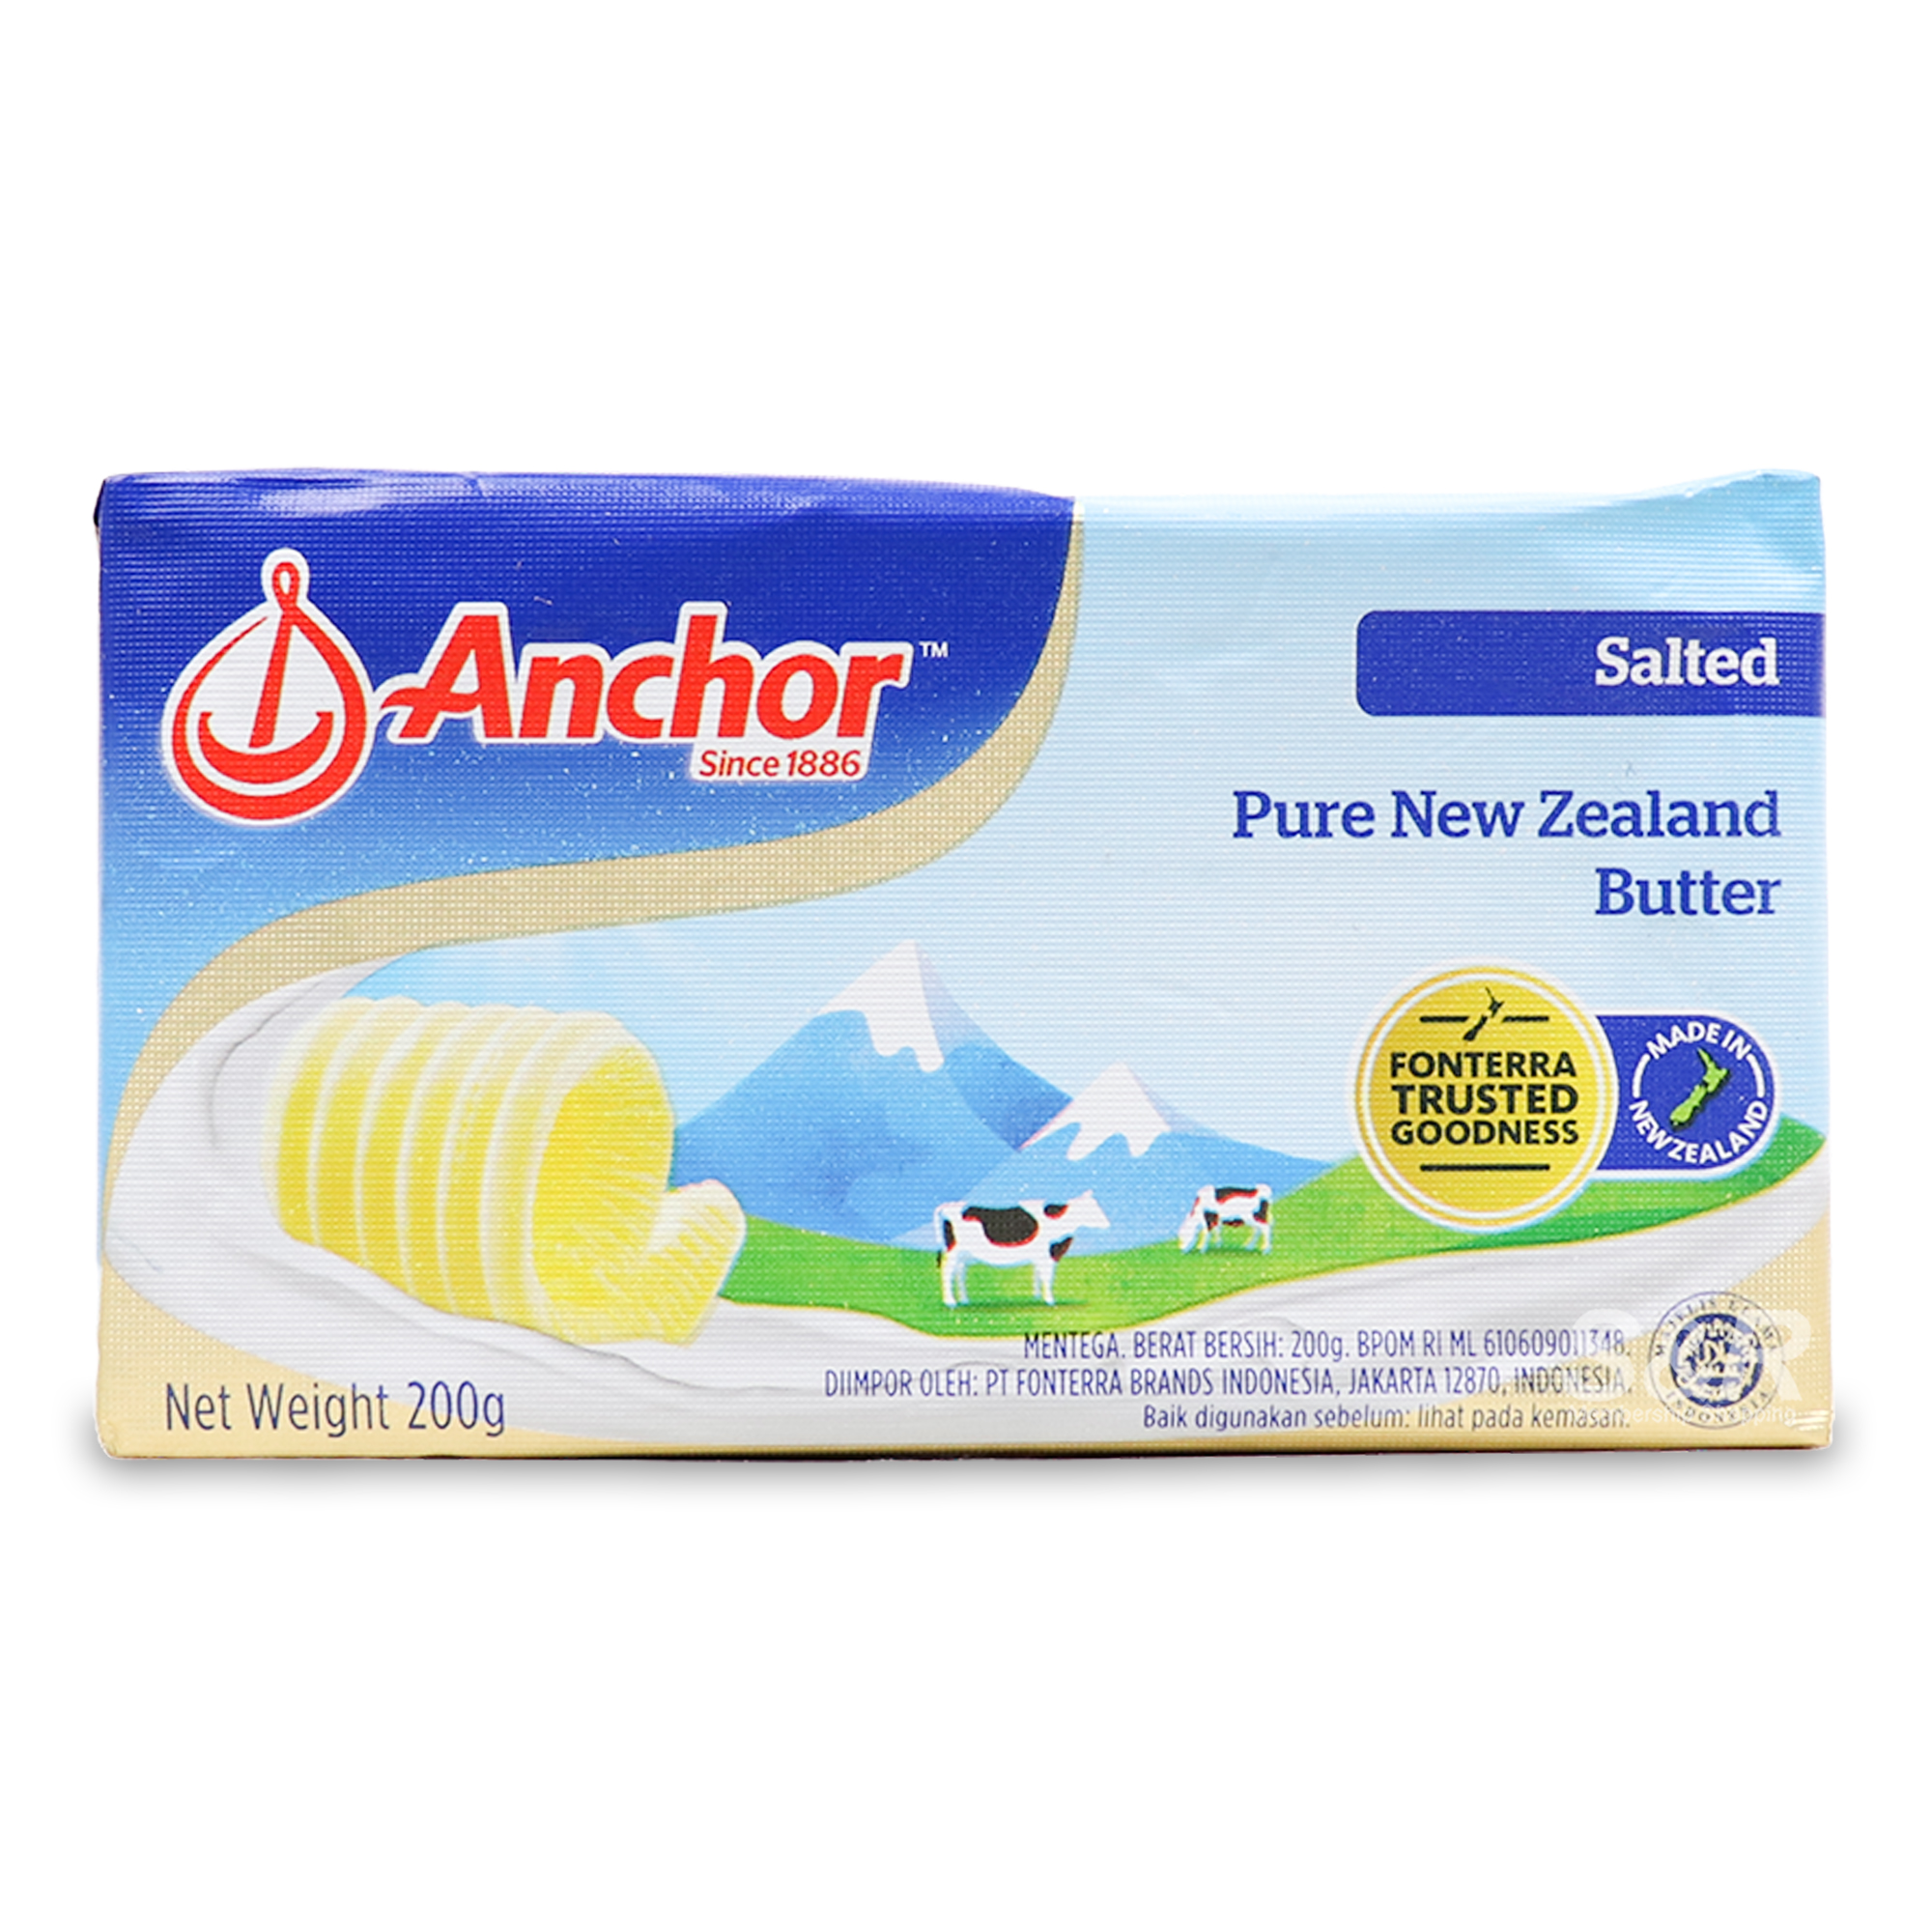 Anchor Pure New Zealand Salted Butter 200g